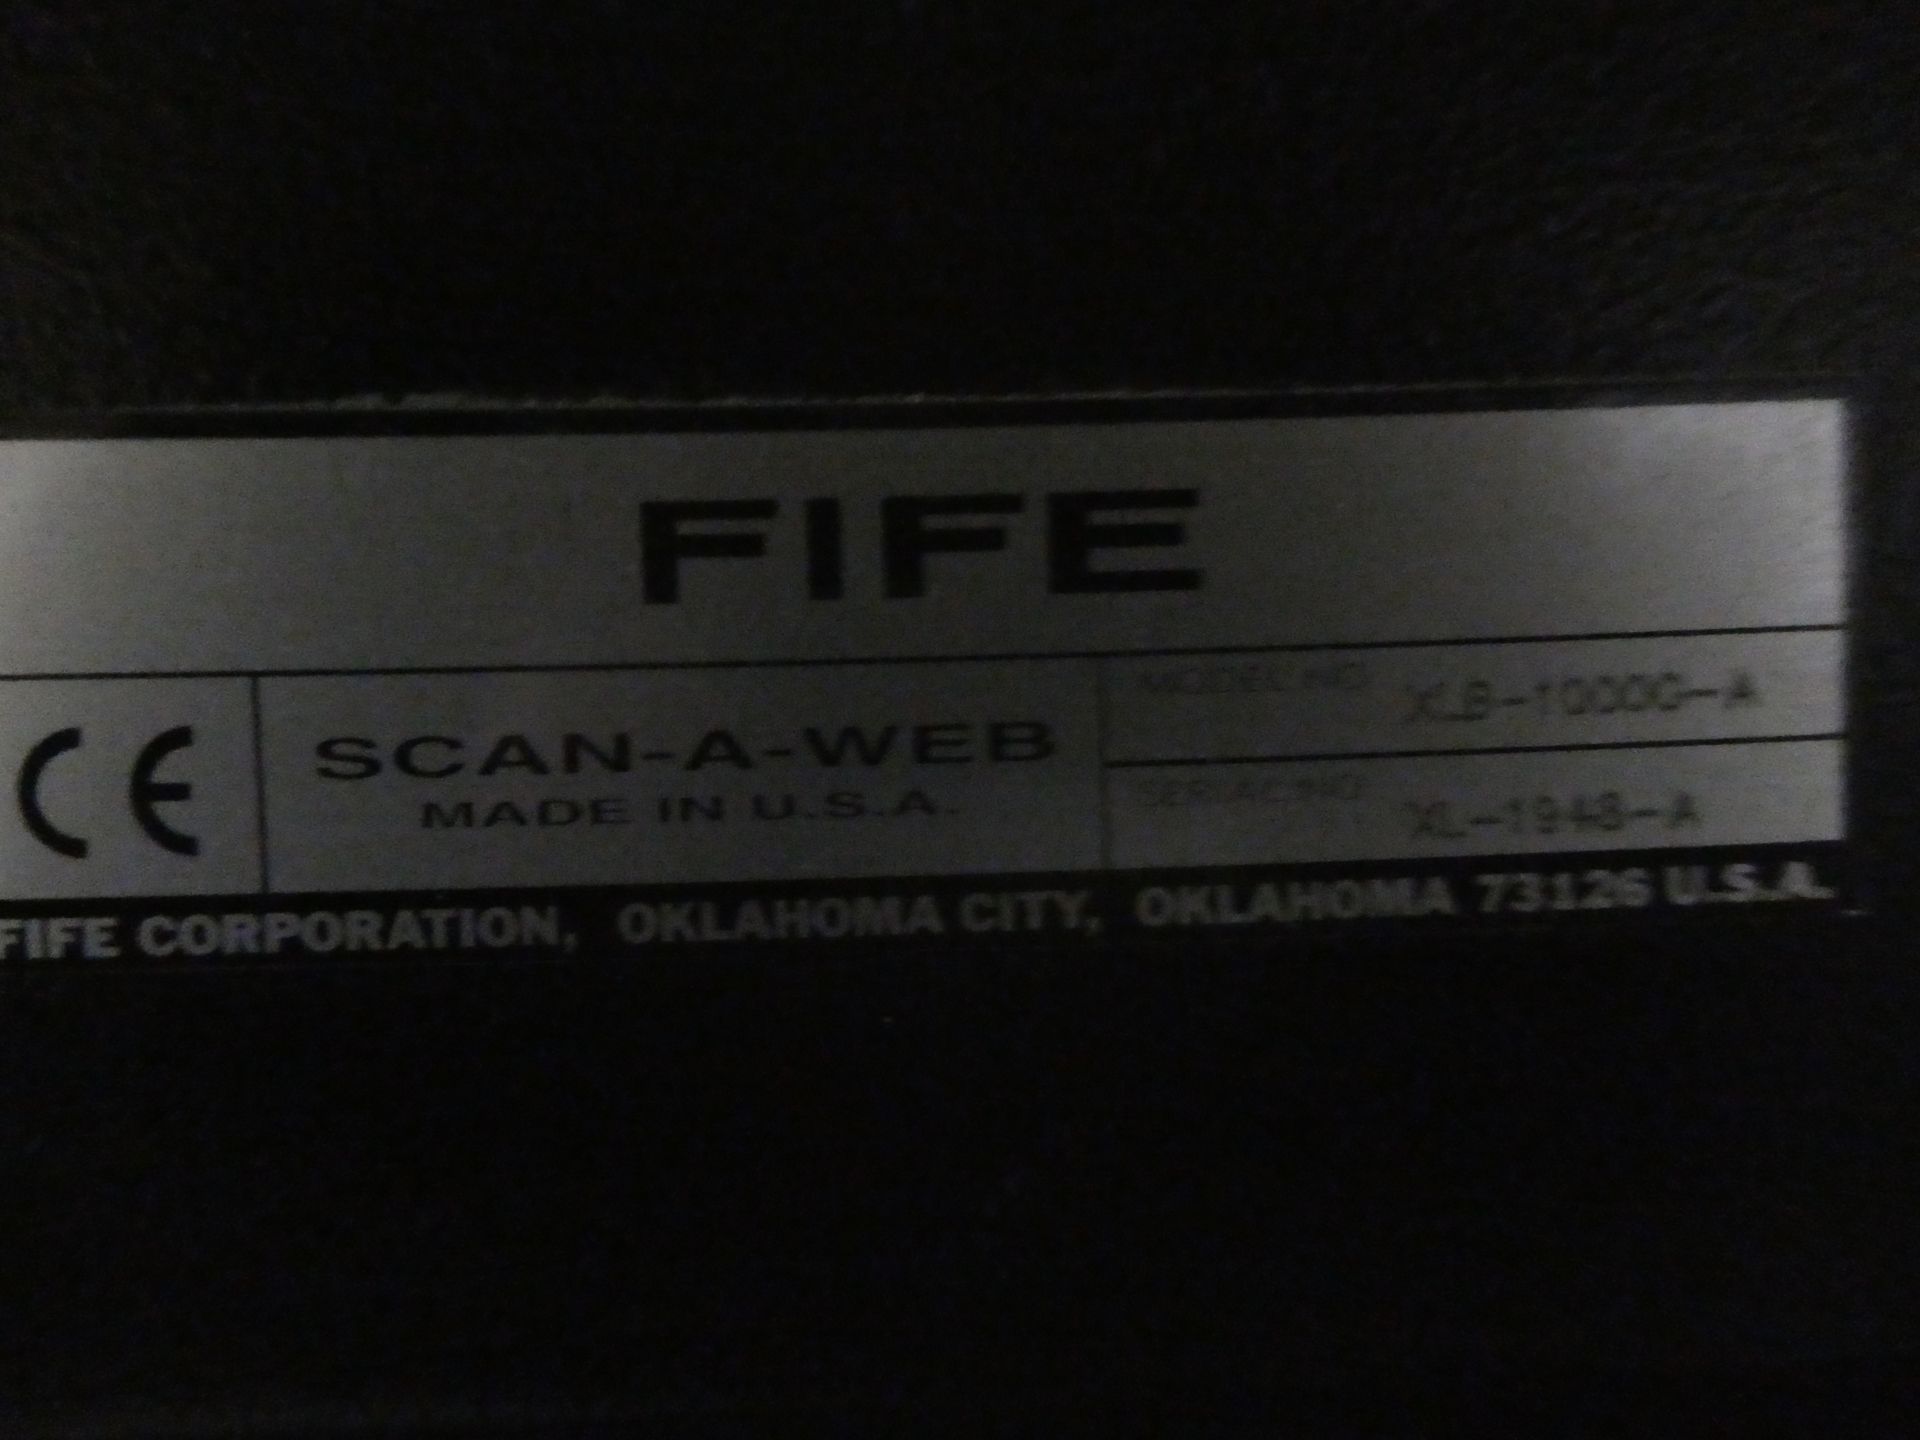 Fife Scan-a-Web Web Inspection System - Image 3 of 6